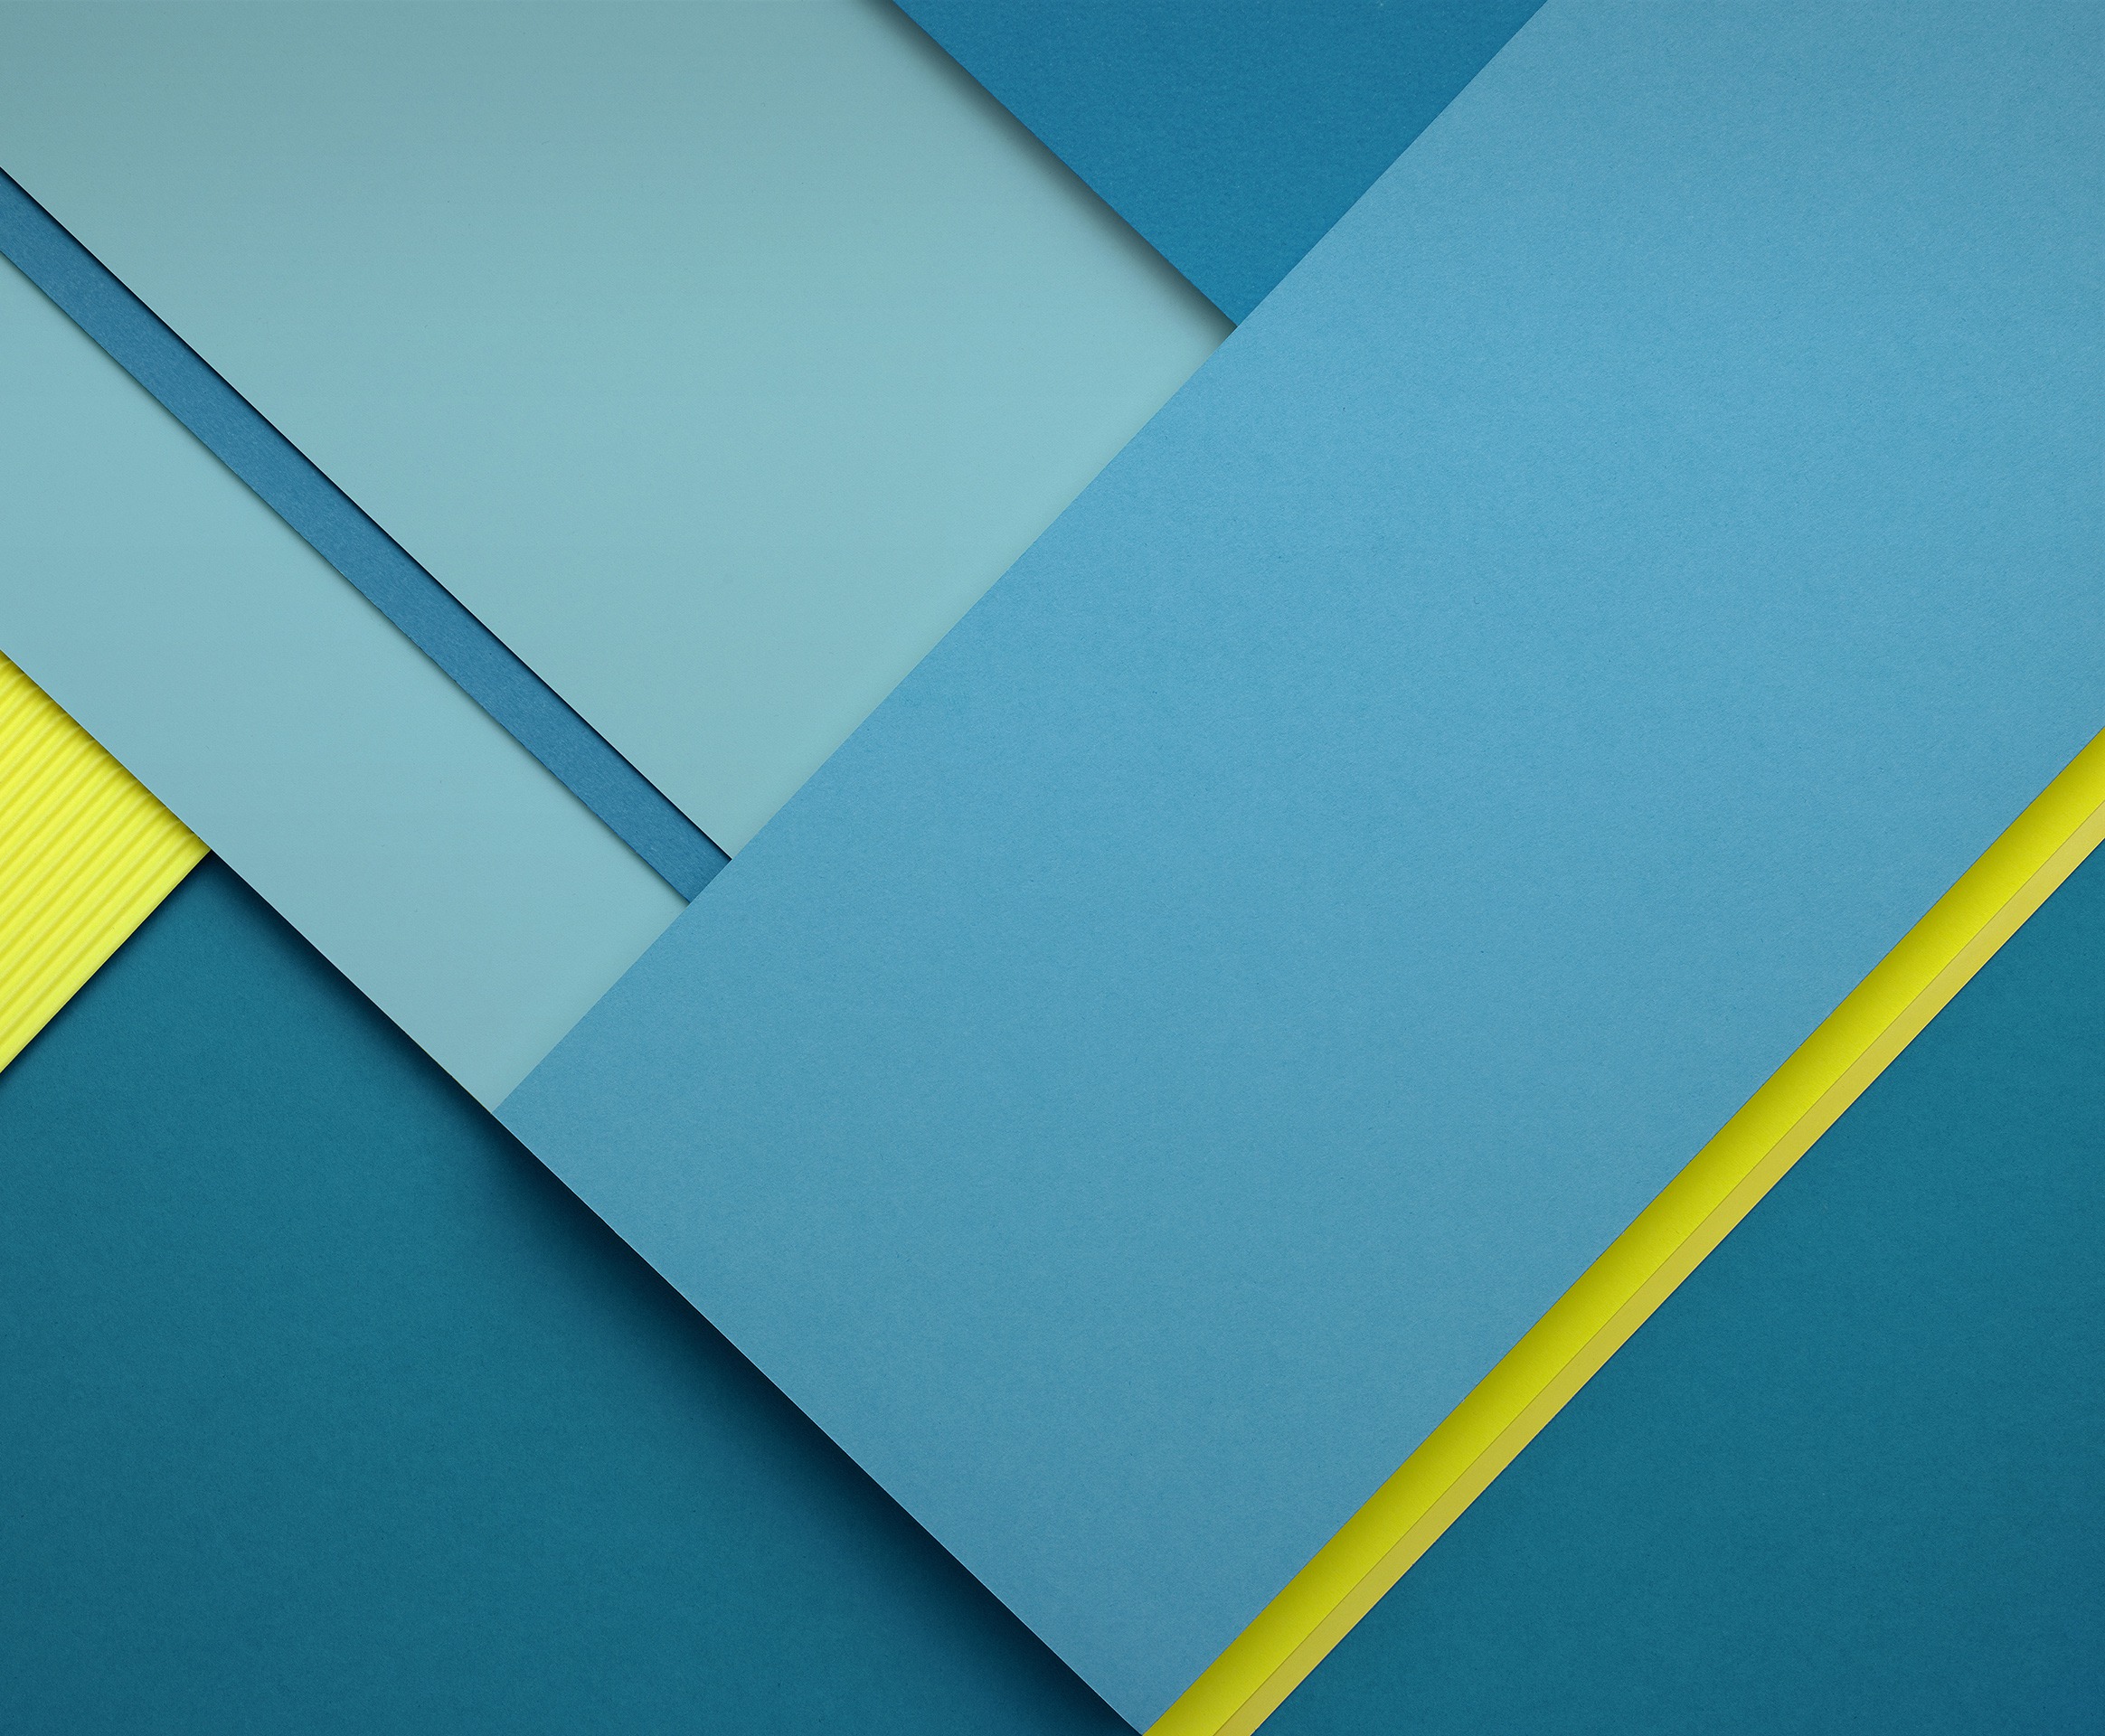 Weekly Wallpaper: Play With Digital Paper With These Android 5.0 Wallpapers